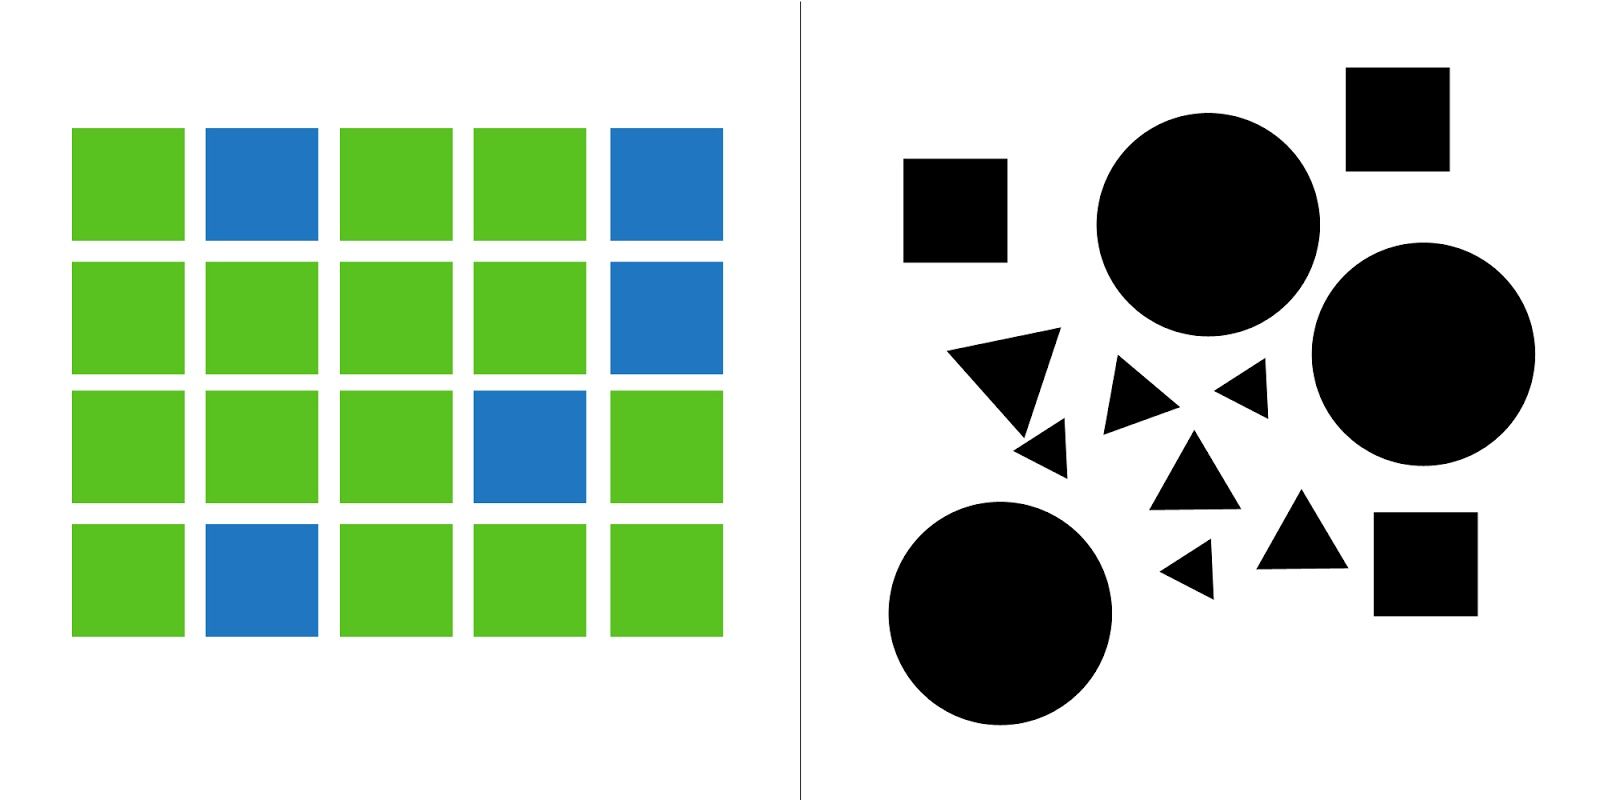 gestalt principles figure ground different from similarity